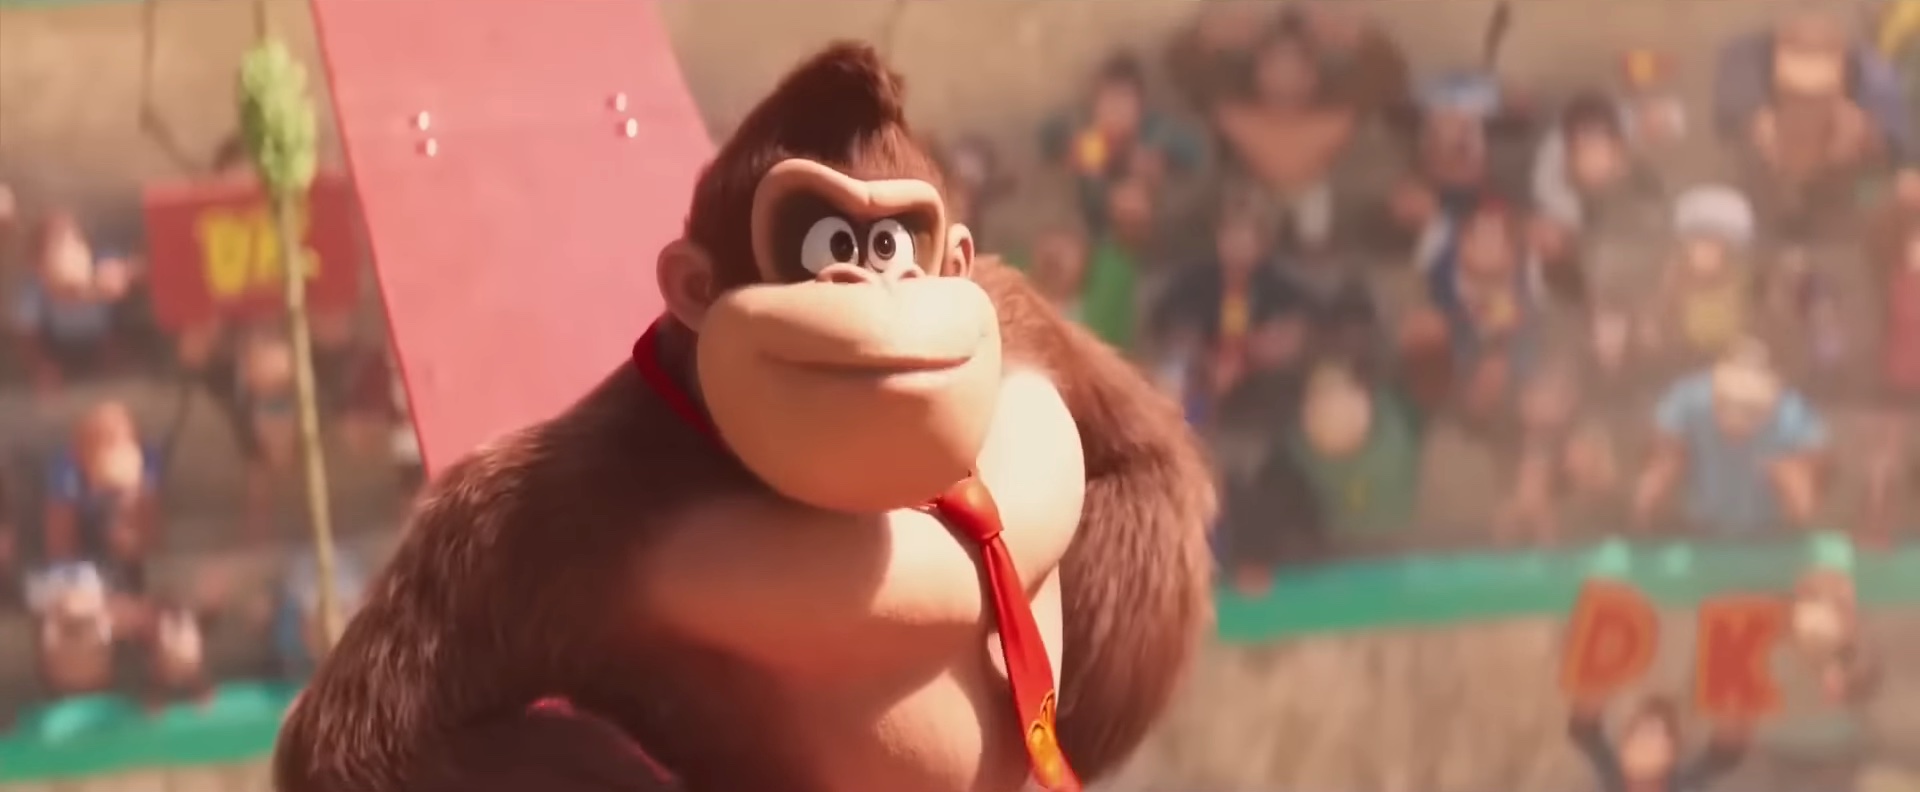 Donkey Kong in "The Super Mario Bros. Movie."